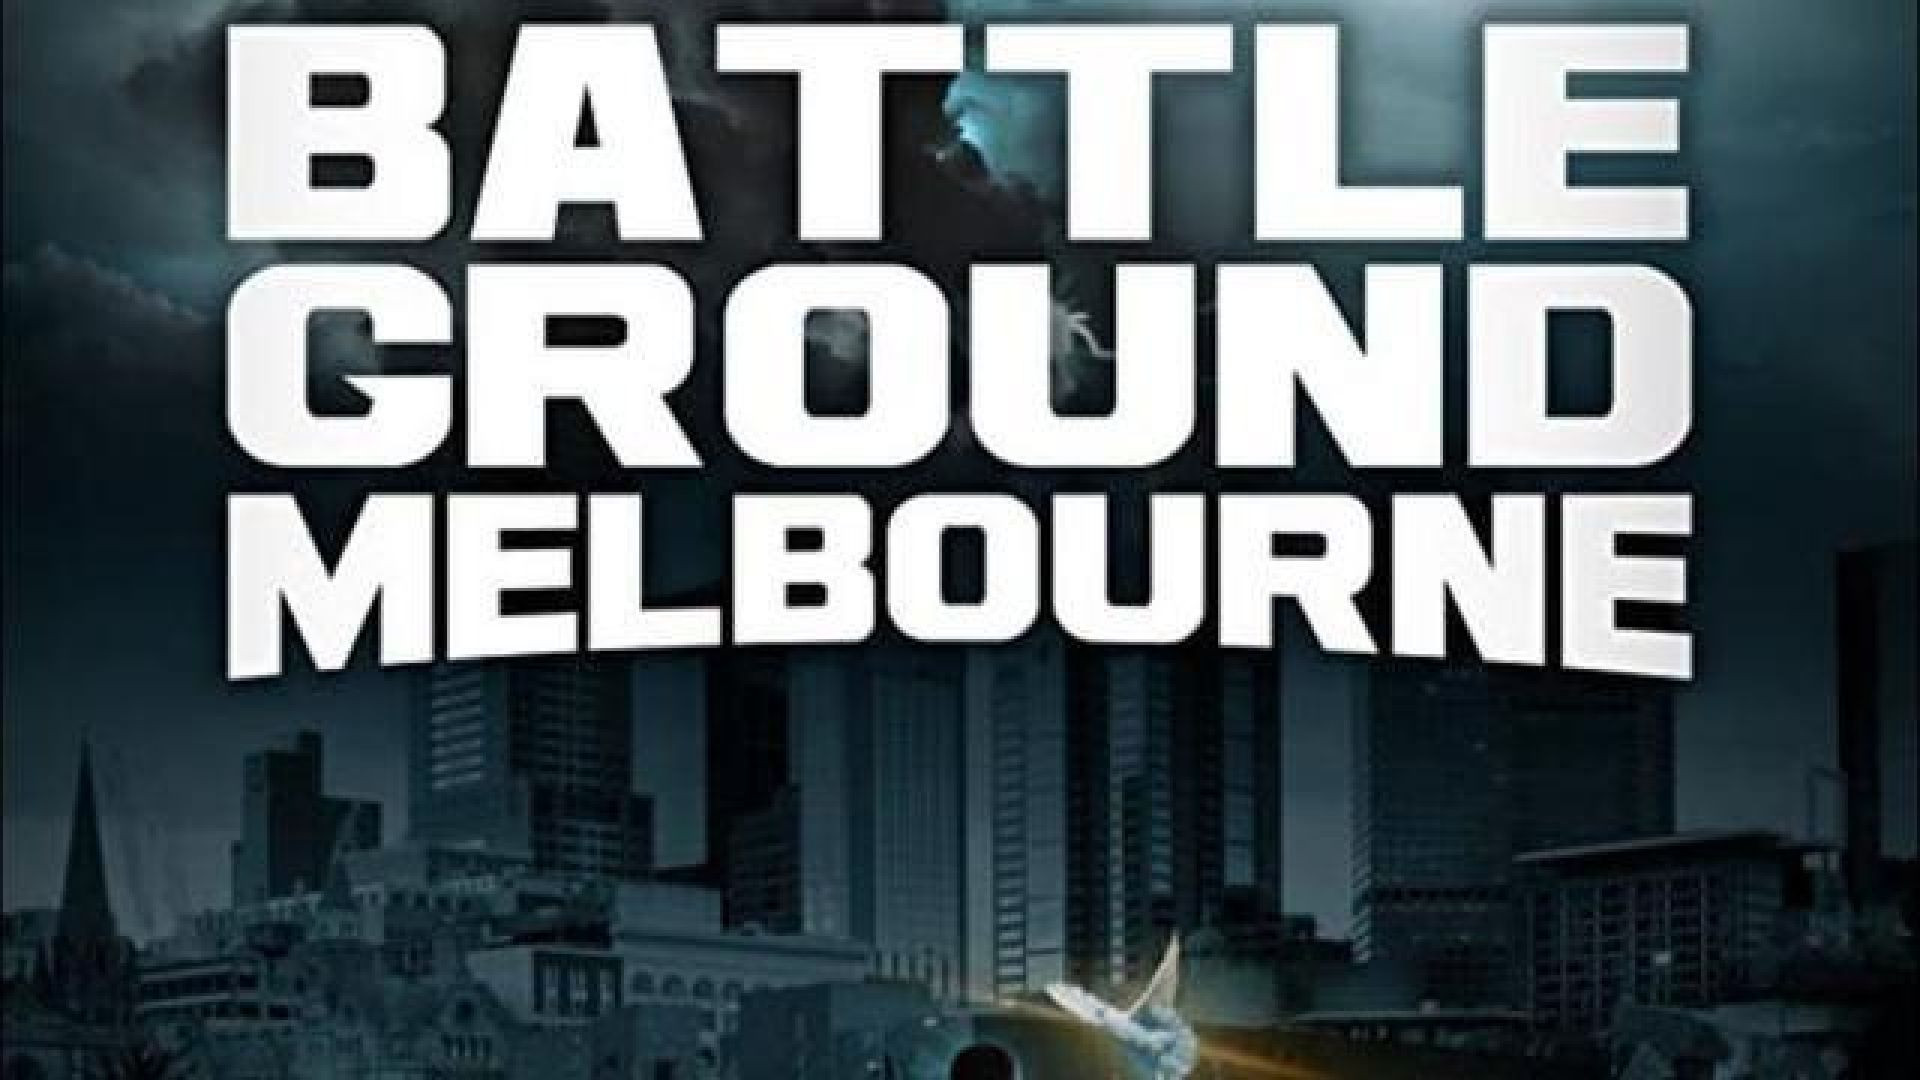 BATTLEGROUND MELBOURNE'- THE FALL OF THE WORLD'S MOST LIVEABLE CITY